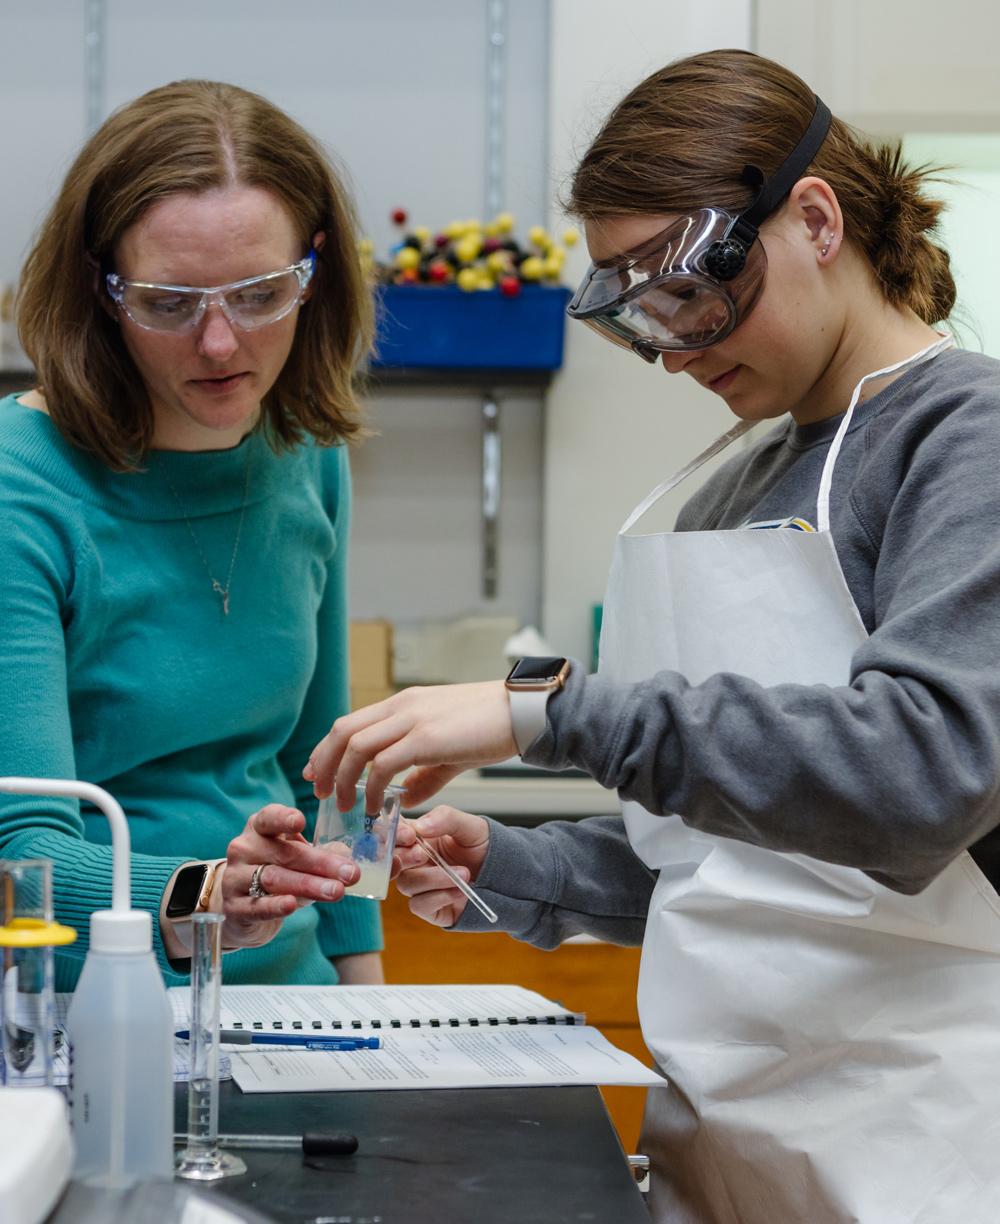 Chemistry professor helping student with research